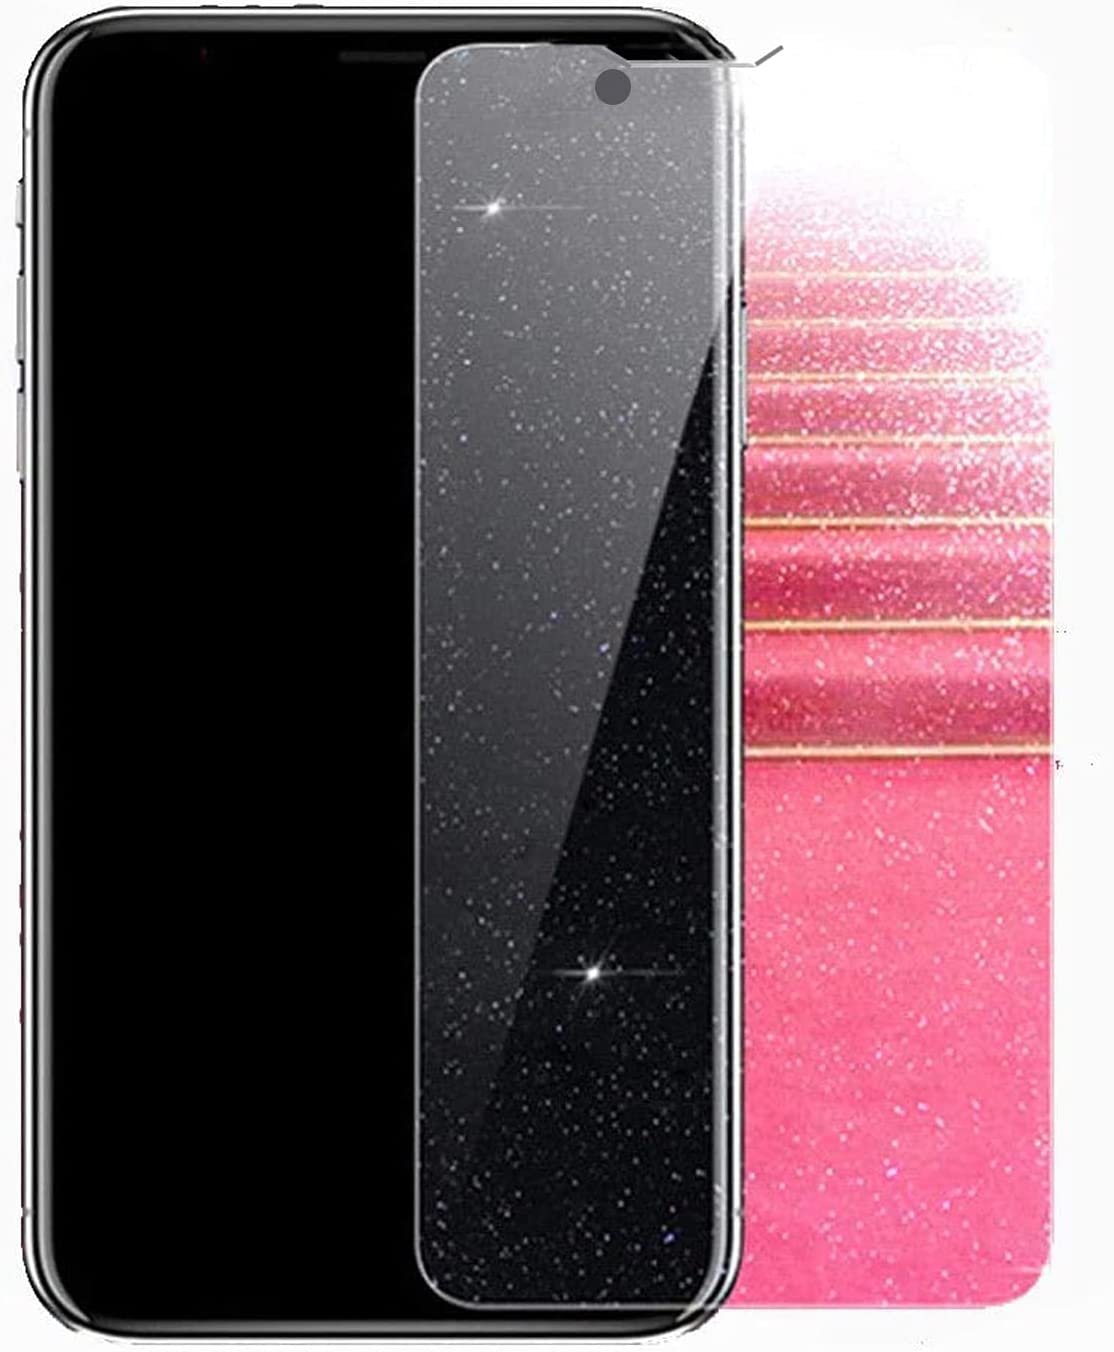 WIRIXSYD 2PCS Glitter Screen Protector Compatible with iPhone 14 Plus/iPhone 13 Pro max, Diamond Bling Shiny Sparkling Tempered Glass Suit for iPhone 13 pro max 6.7 Inch/iPhone 14 Plus 6.7 Inch